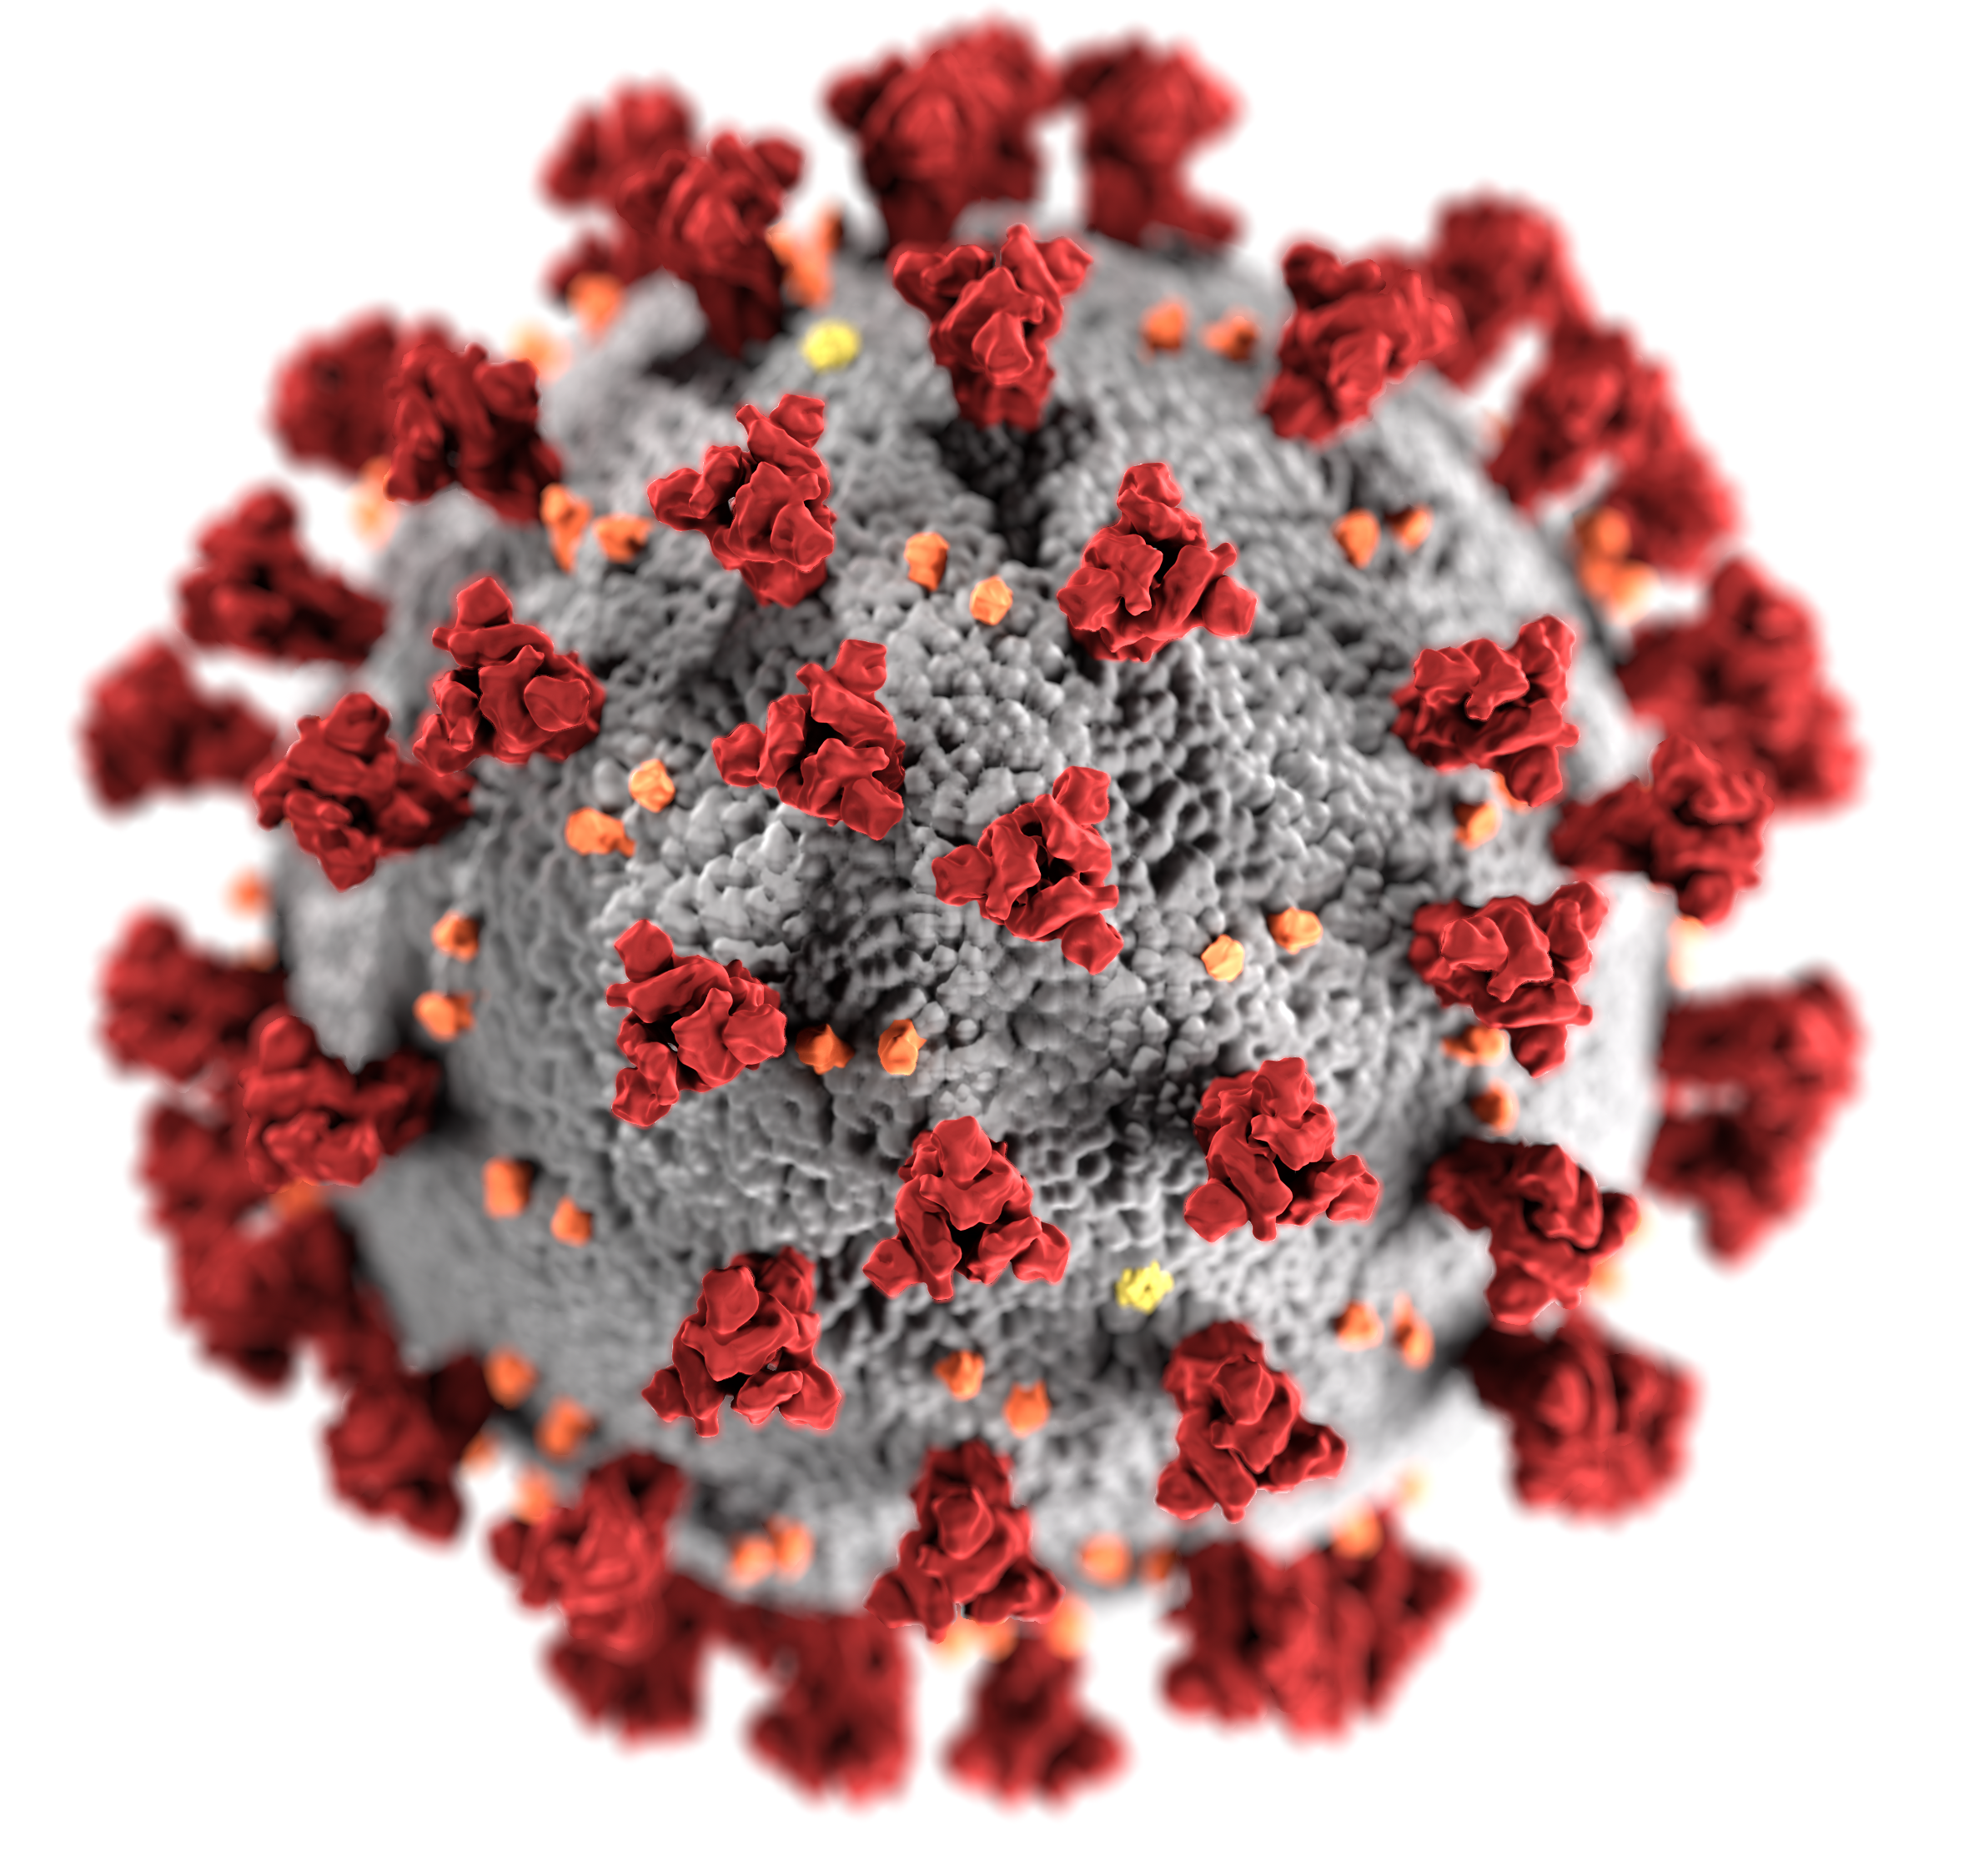 This illustration, created at the Centers for Disease Control and Prevention (CDC), reveals ultrastructural morphology exhibited by the 2019 Novel Coronavirus (2019-nCoV). Note the spikes that adorn the outer surface of the virus, which impart the look of a corona surrounding the virion, when viewed electron microscopically. This virus was identified as the cause of an outbreak of respiratory illness first detected in Wuhan, China.